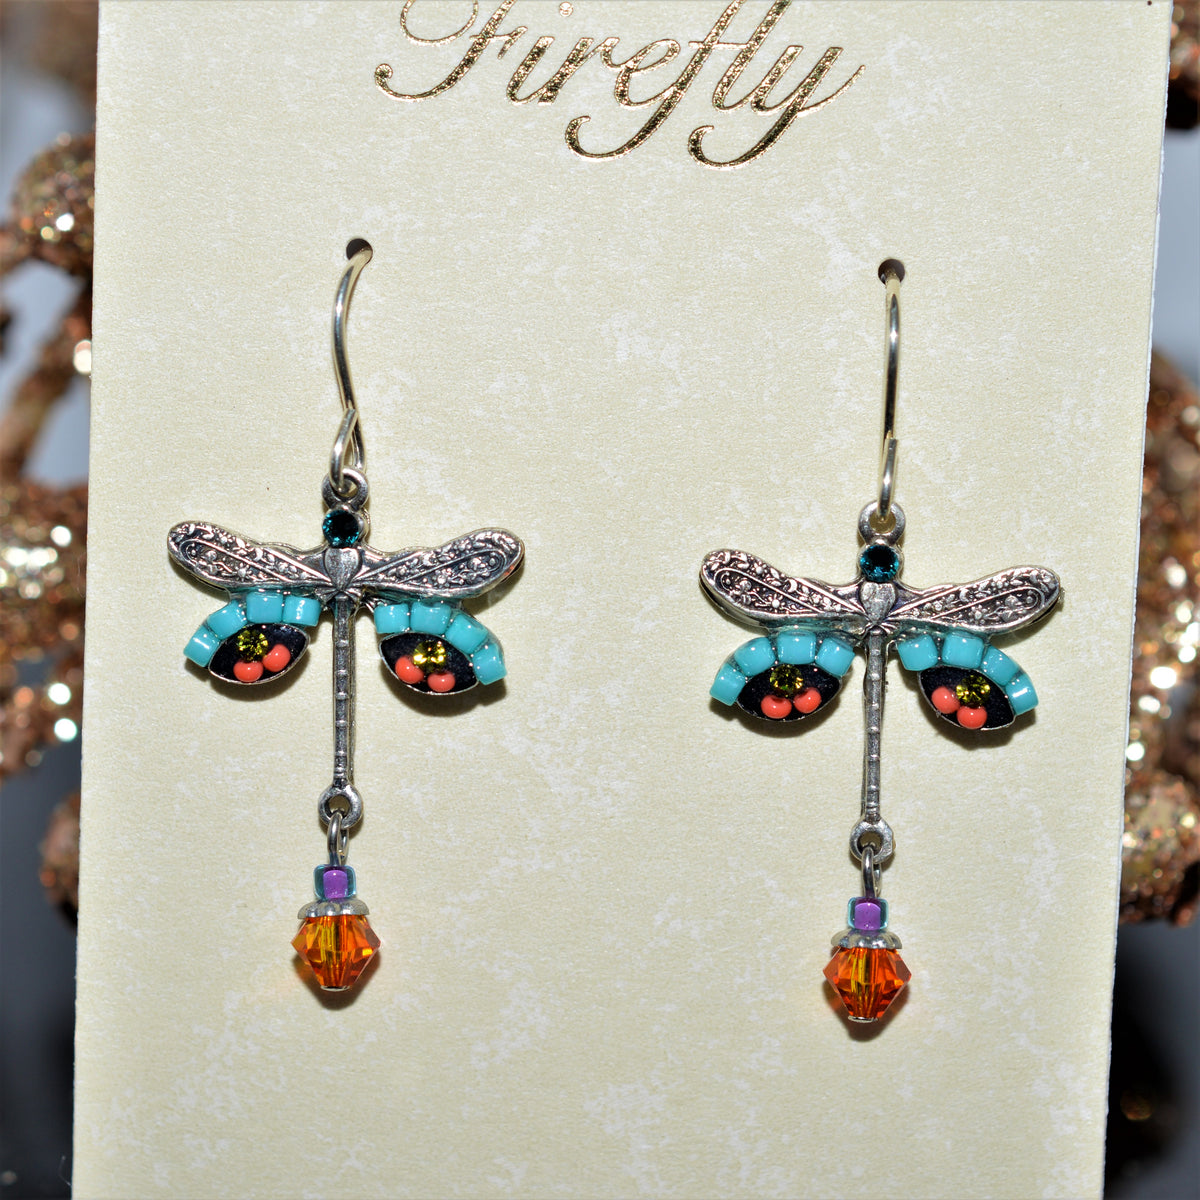 Antique Silver Plated Dragonfly Earrings With Multicolor Crystals by Firefly